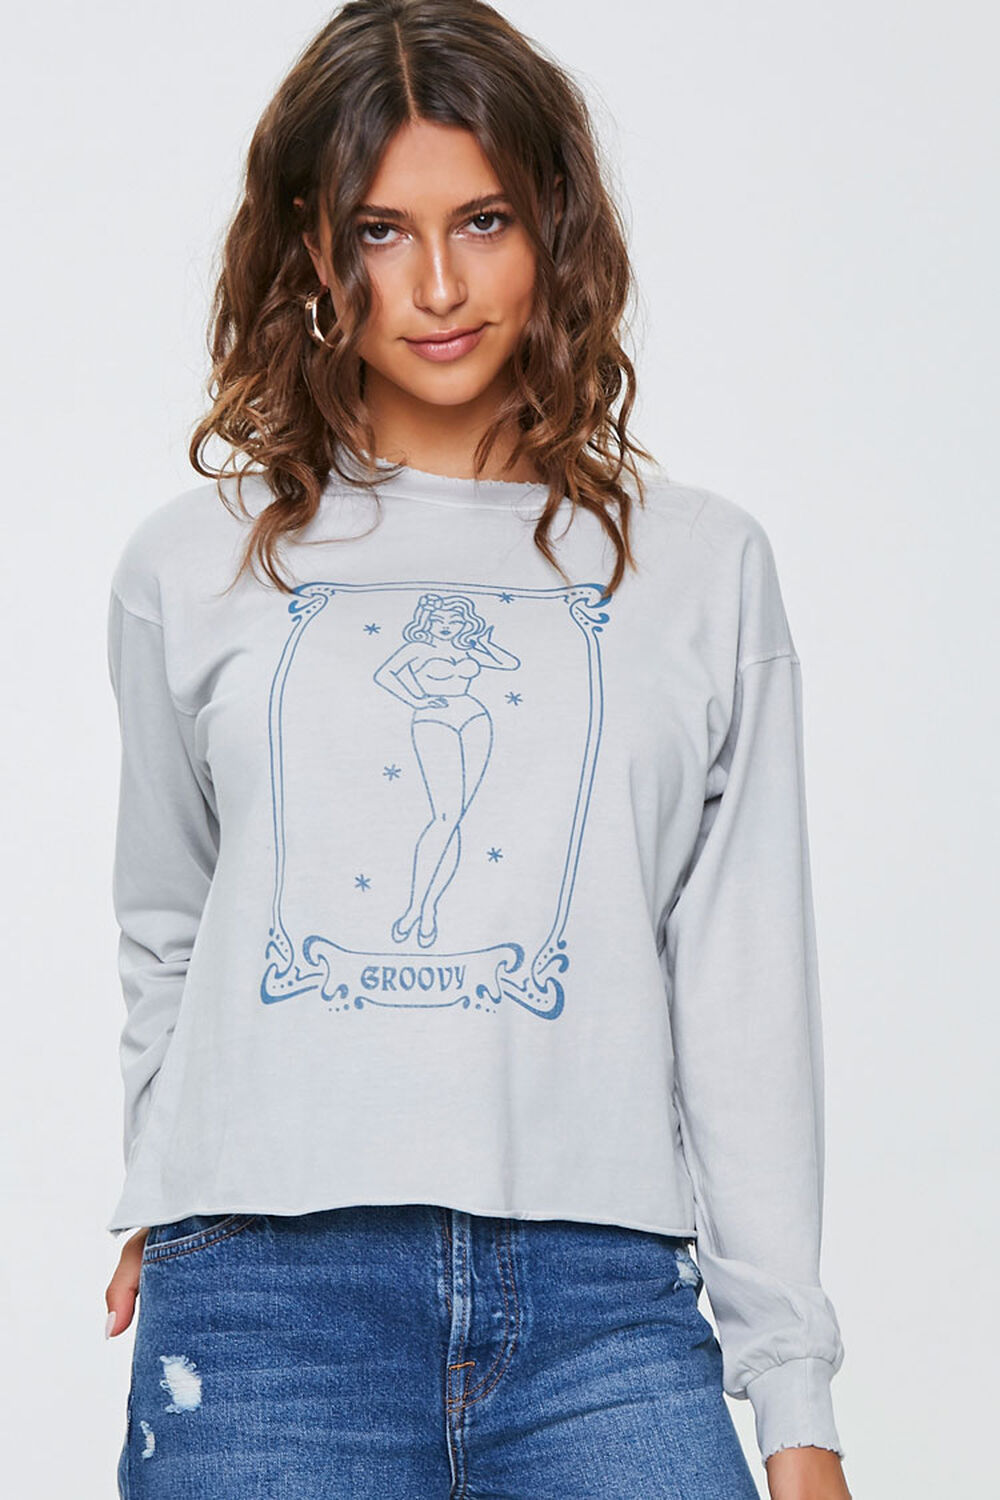 Groovy Pin-Up Girl Graphic Top, image 1